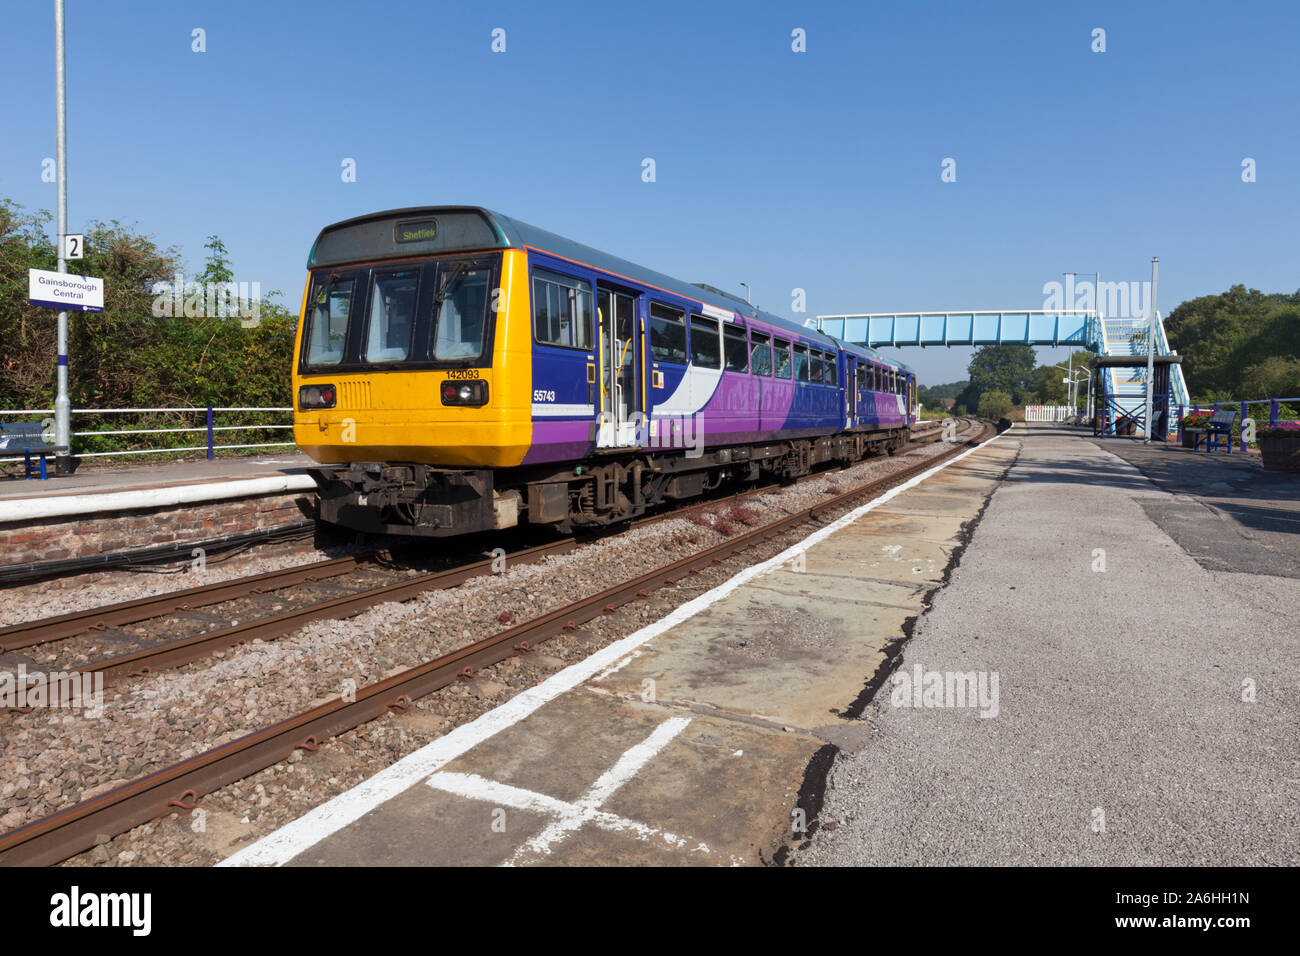 Arriva Northern rail class 142 pacer train at Gainsborough Central railway station Stock Photo